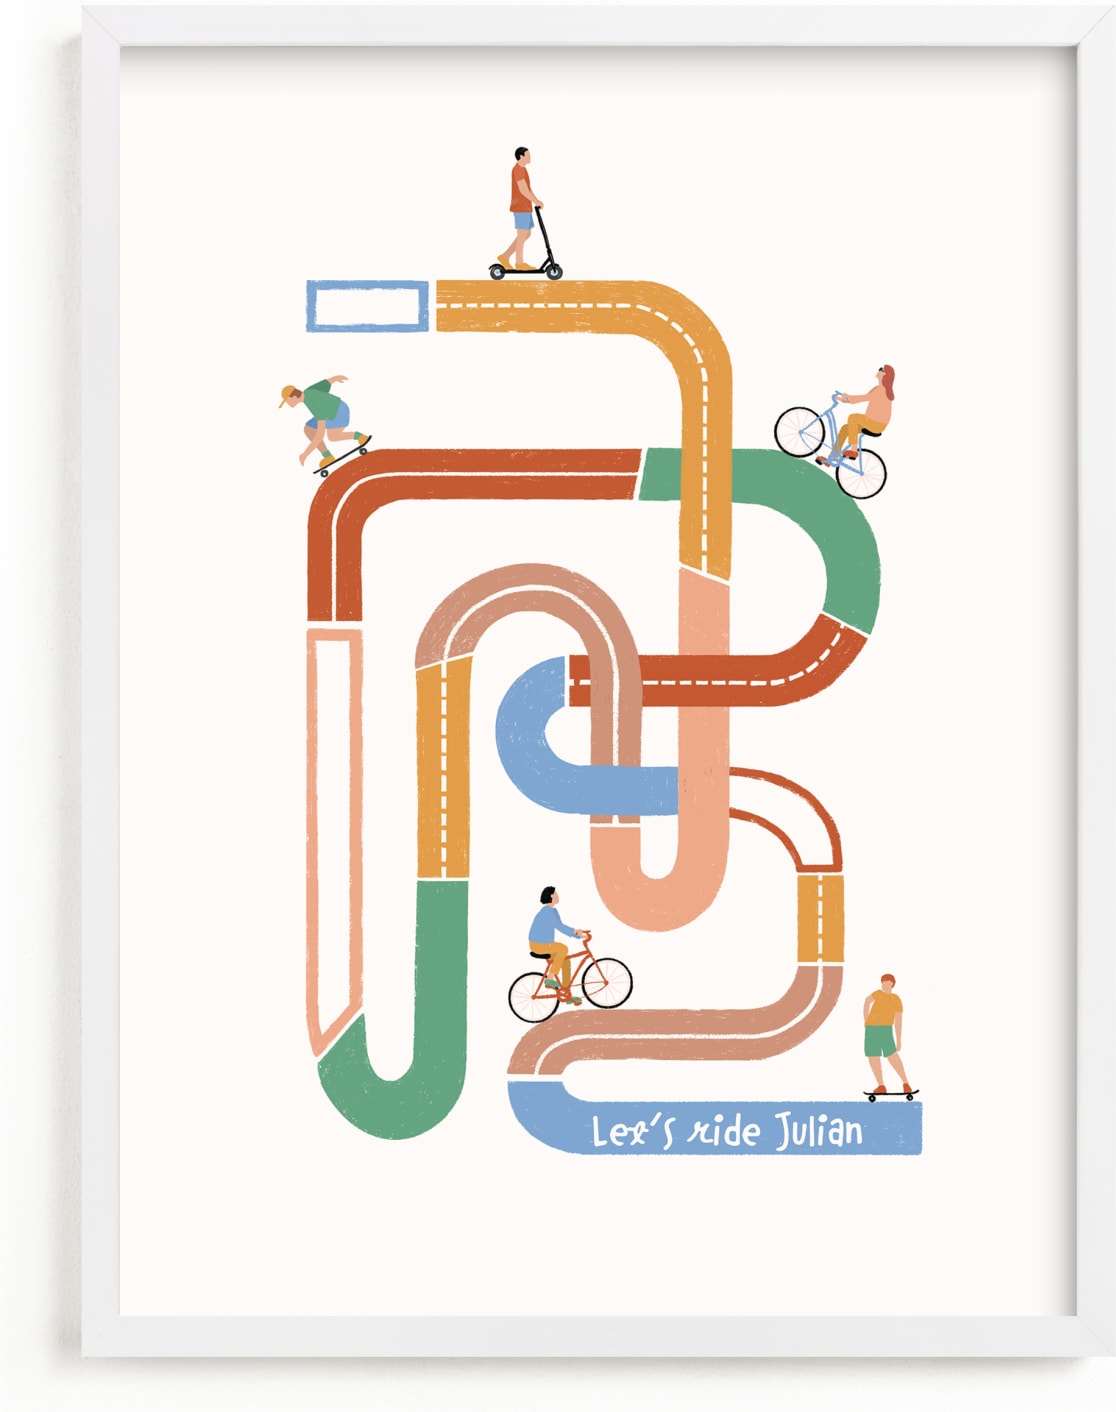 This is a colorful personalized art for kid by Pati Cascino called So many roads to ride.